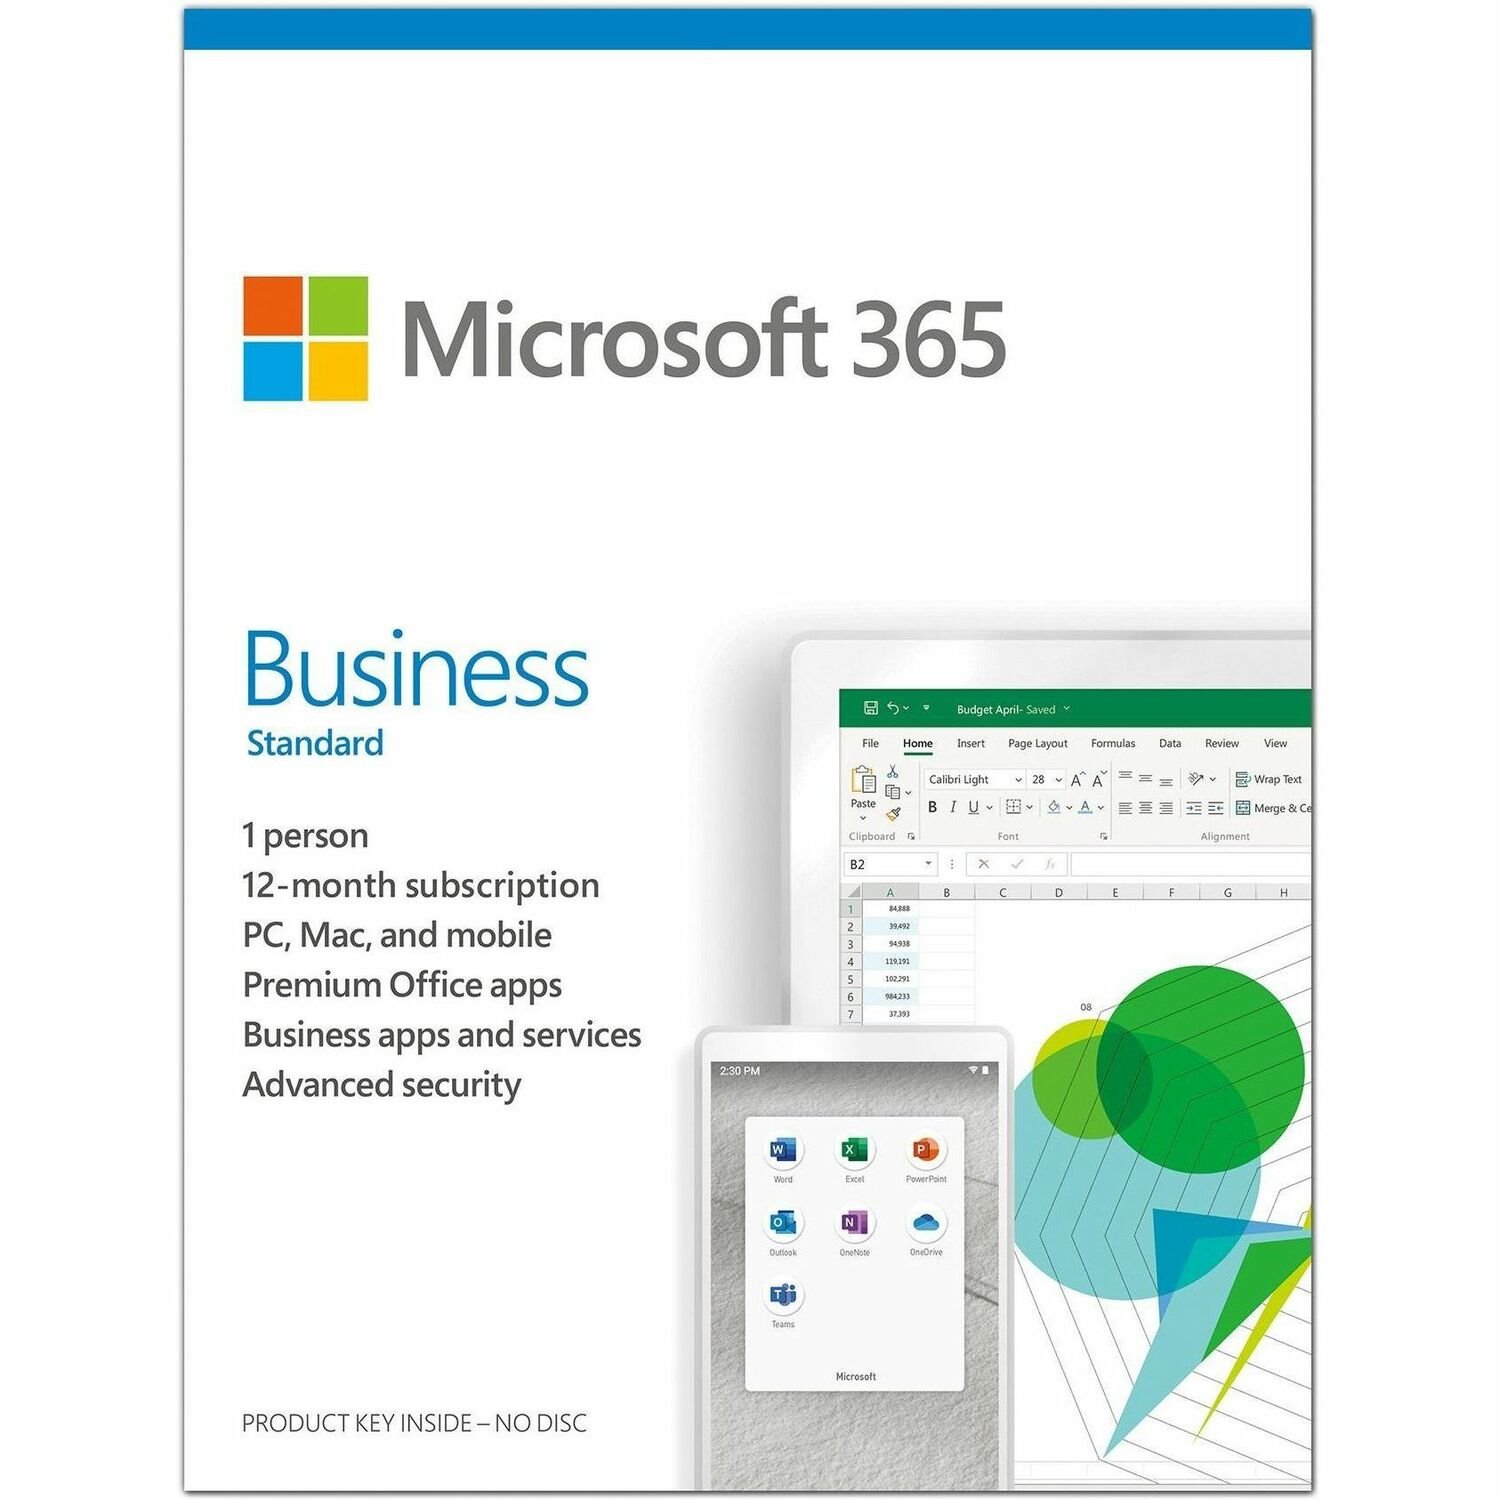 Microsoft 365 Business Standard - Box Pack - 1 User, 5 Devices - 1 Year